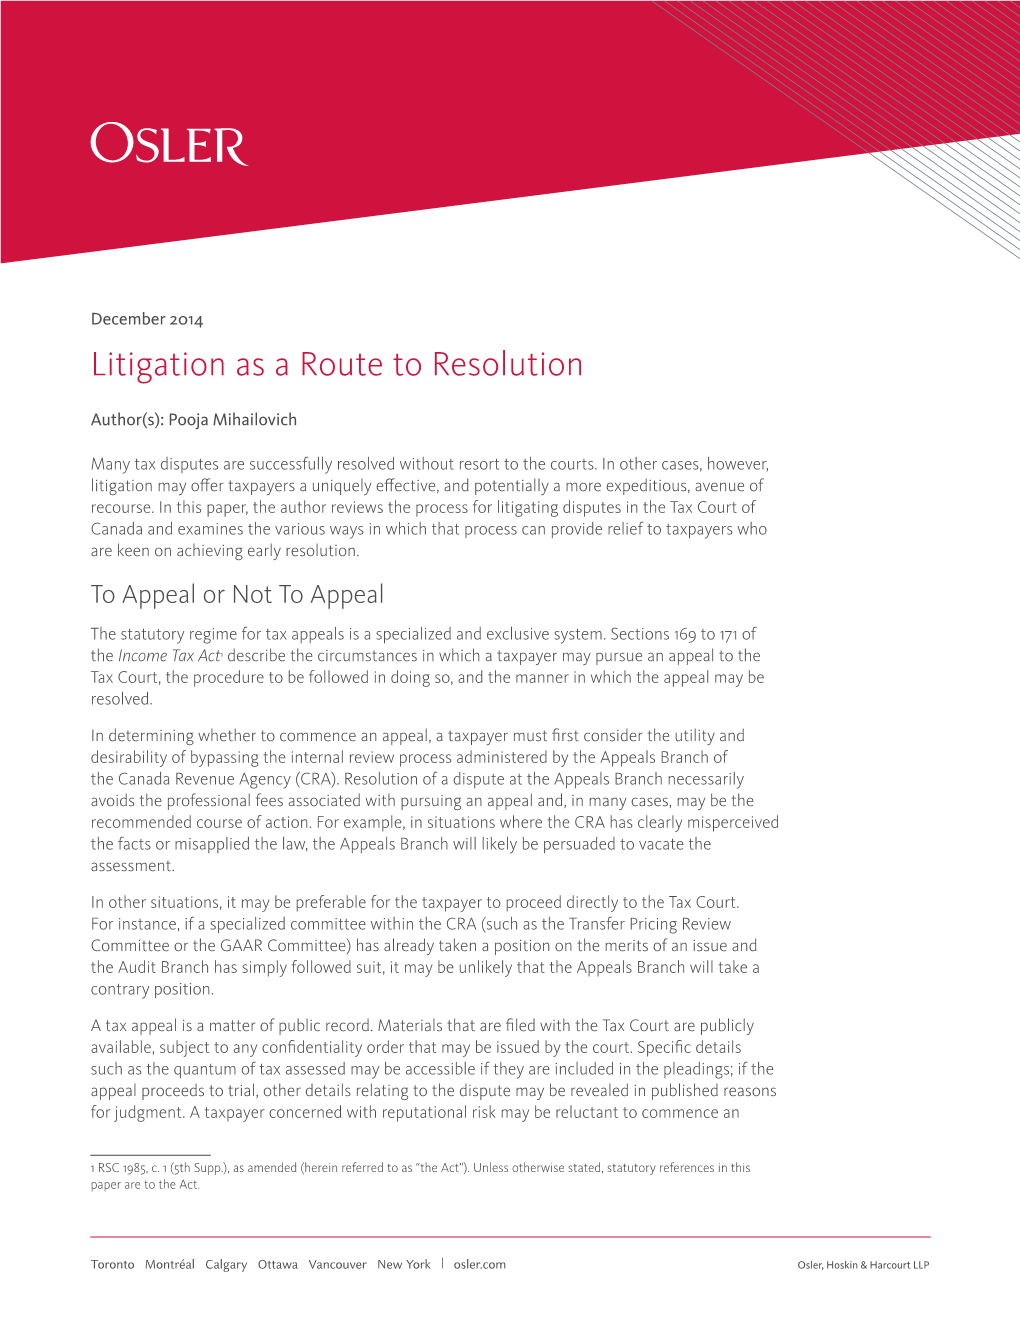 Litigation As a Route to Resolution